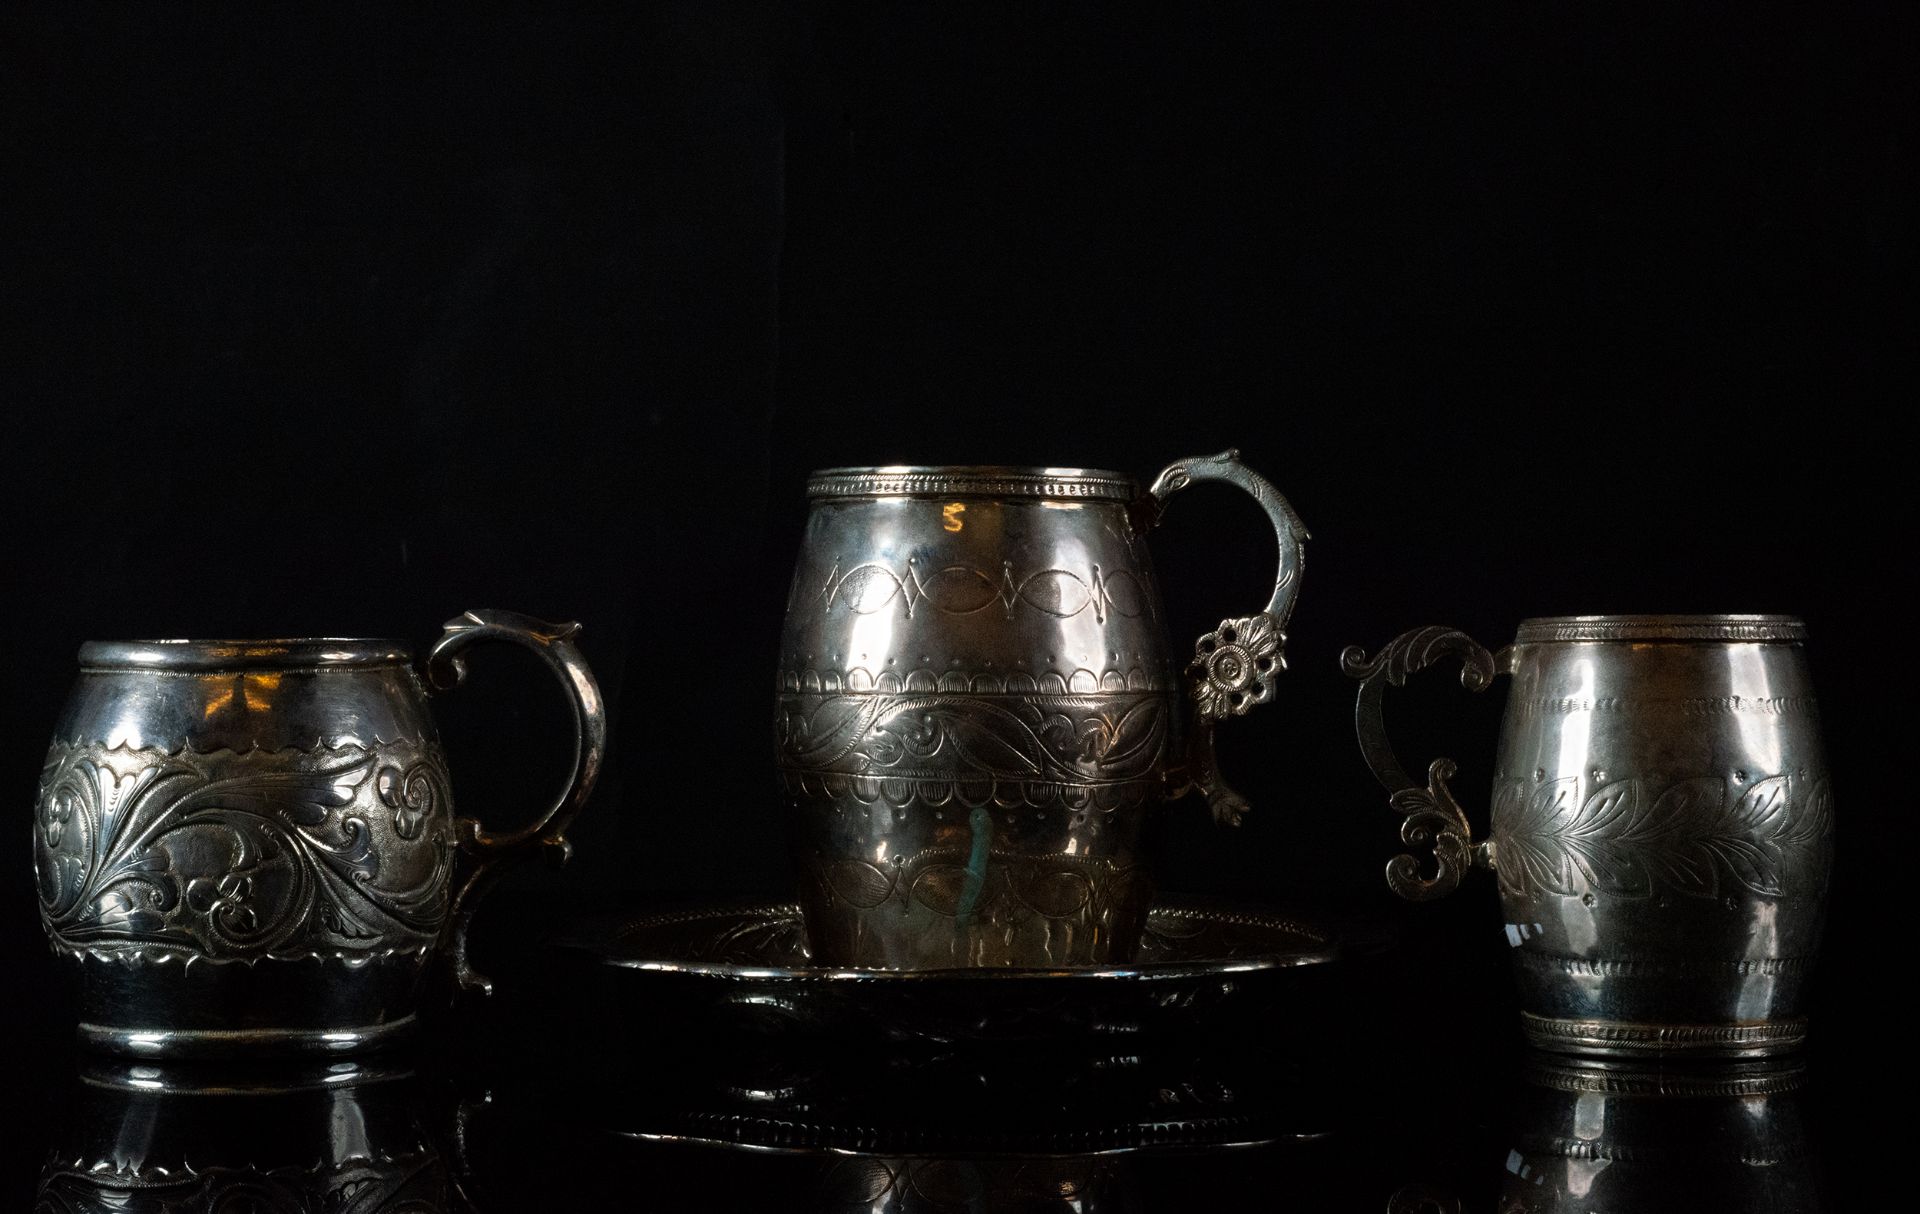 Set of three jugs for Chocolate with its underplate, Viceroyalty of Peru, 18th - 19th century